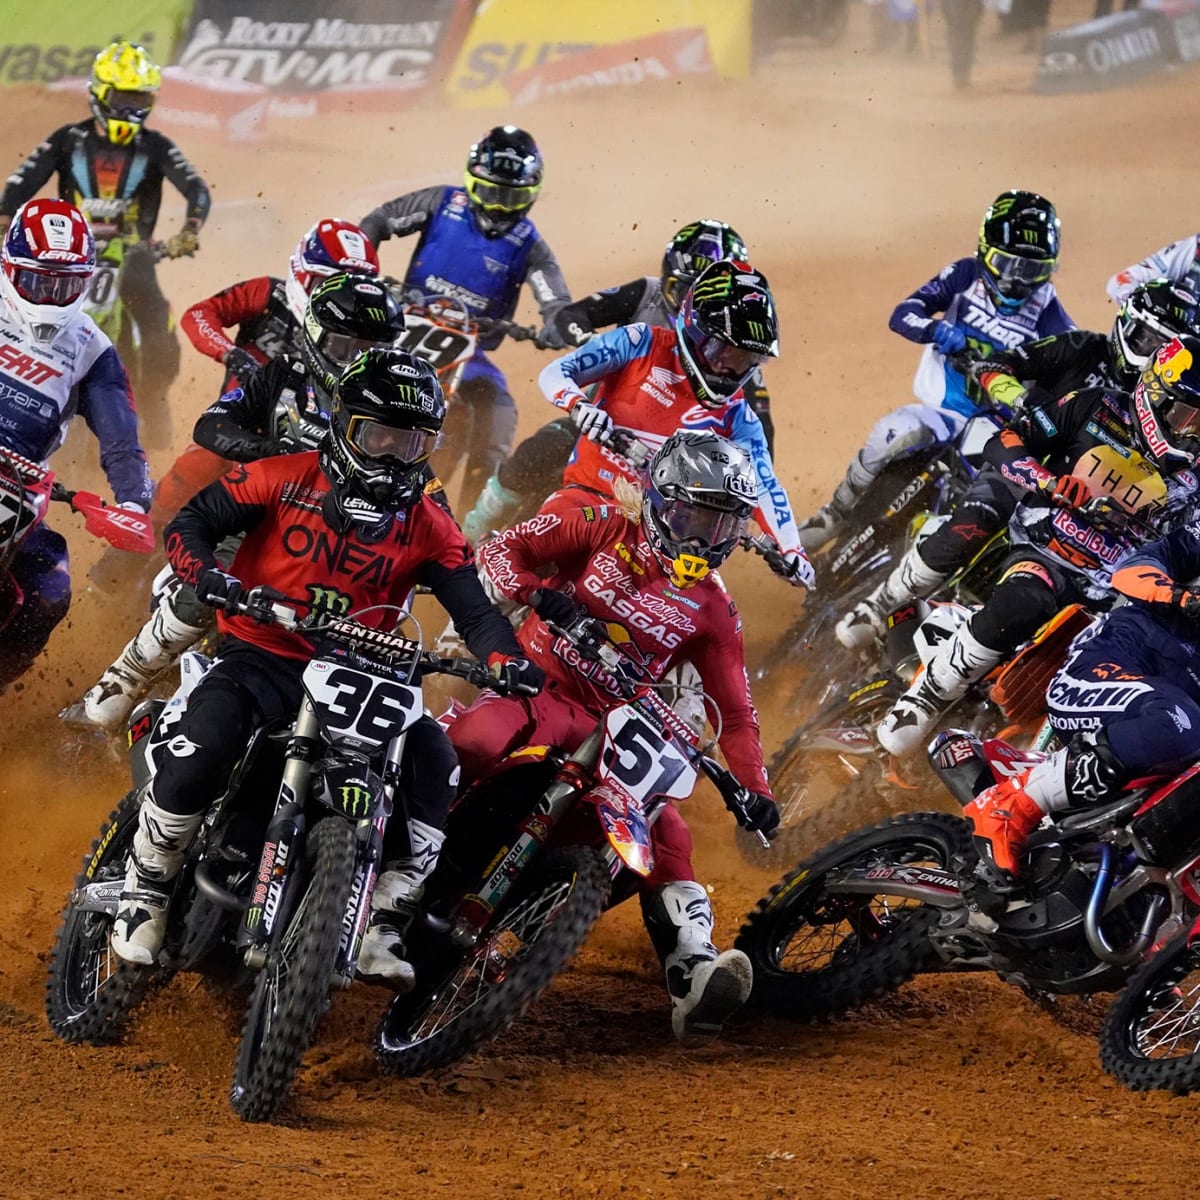 Watch Motocross of Nations race 2 Live stream, TV channel - How to Watch and Stream Major League and College Sports